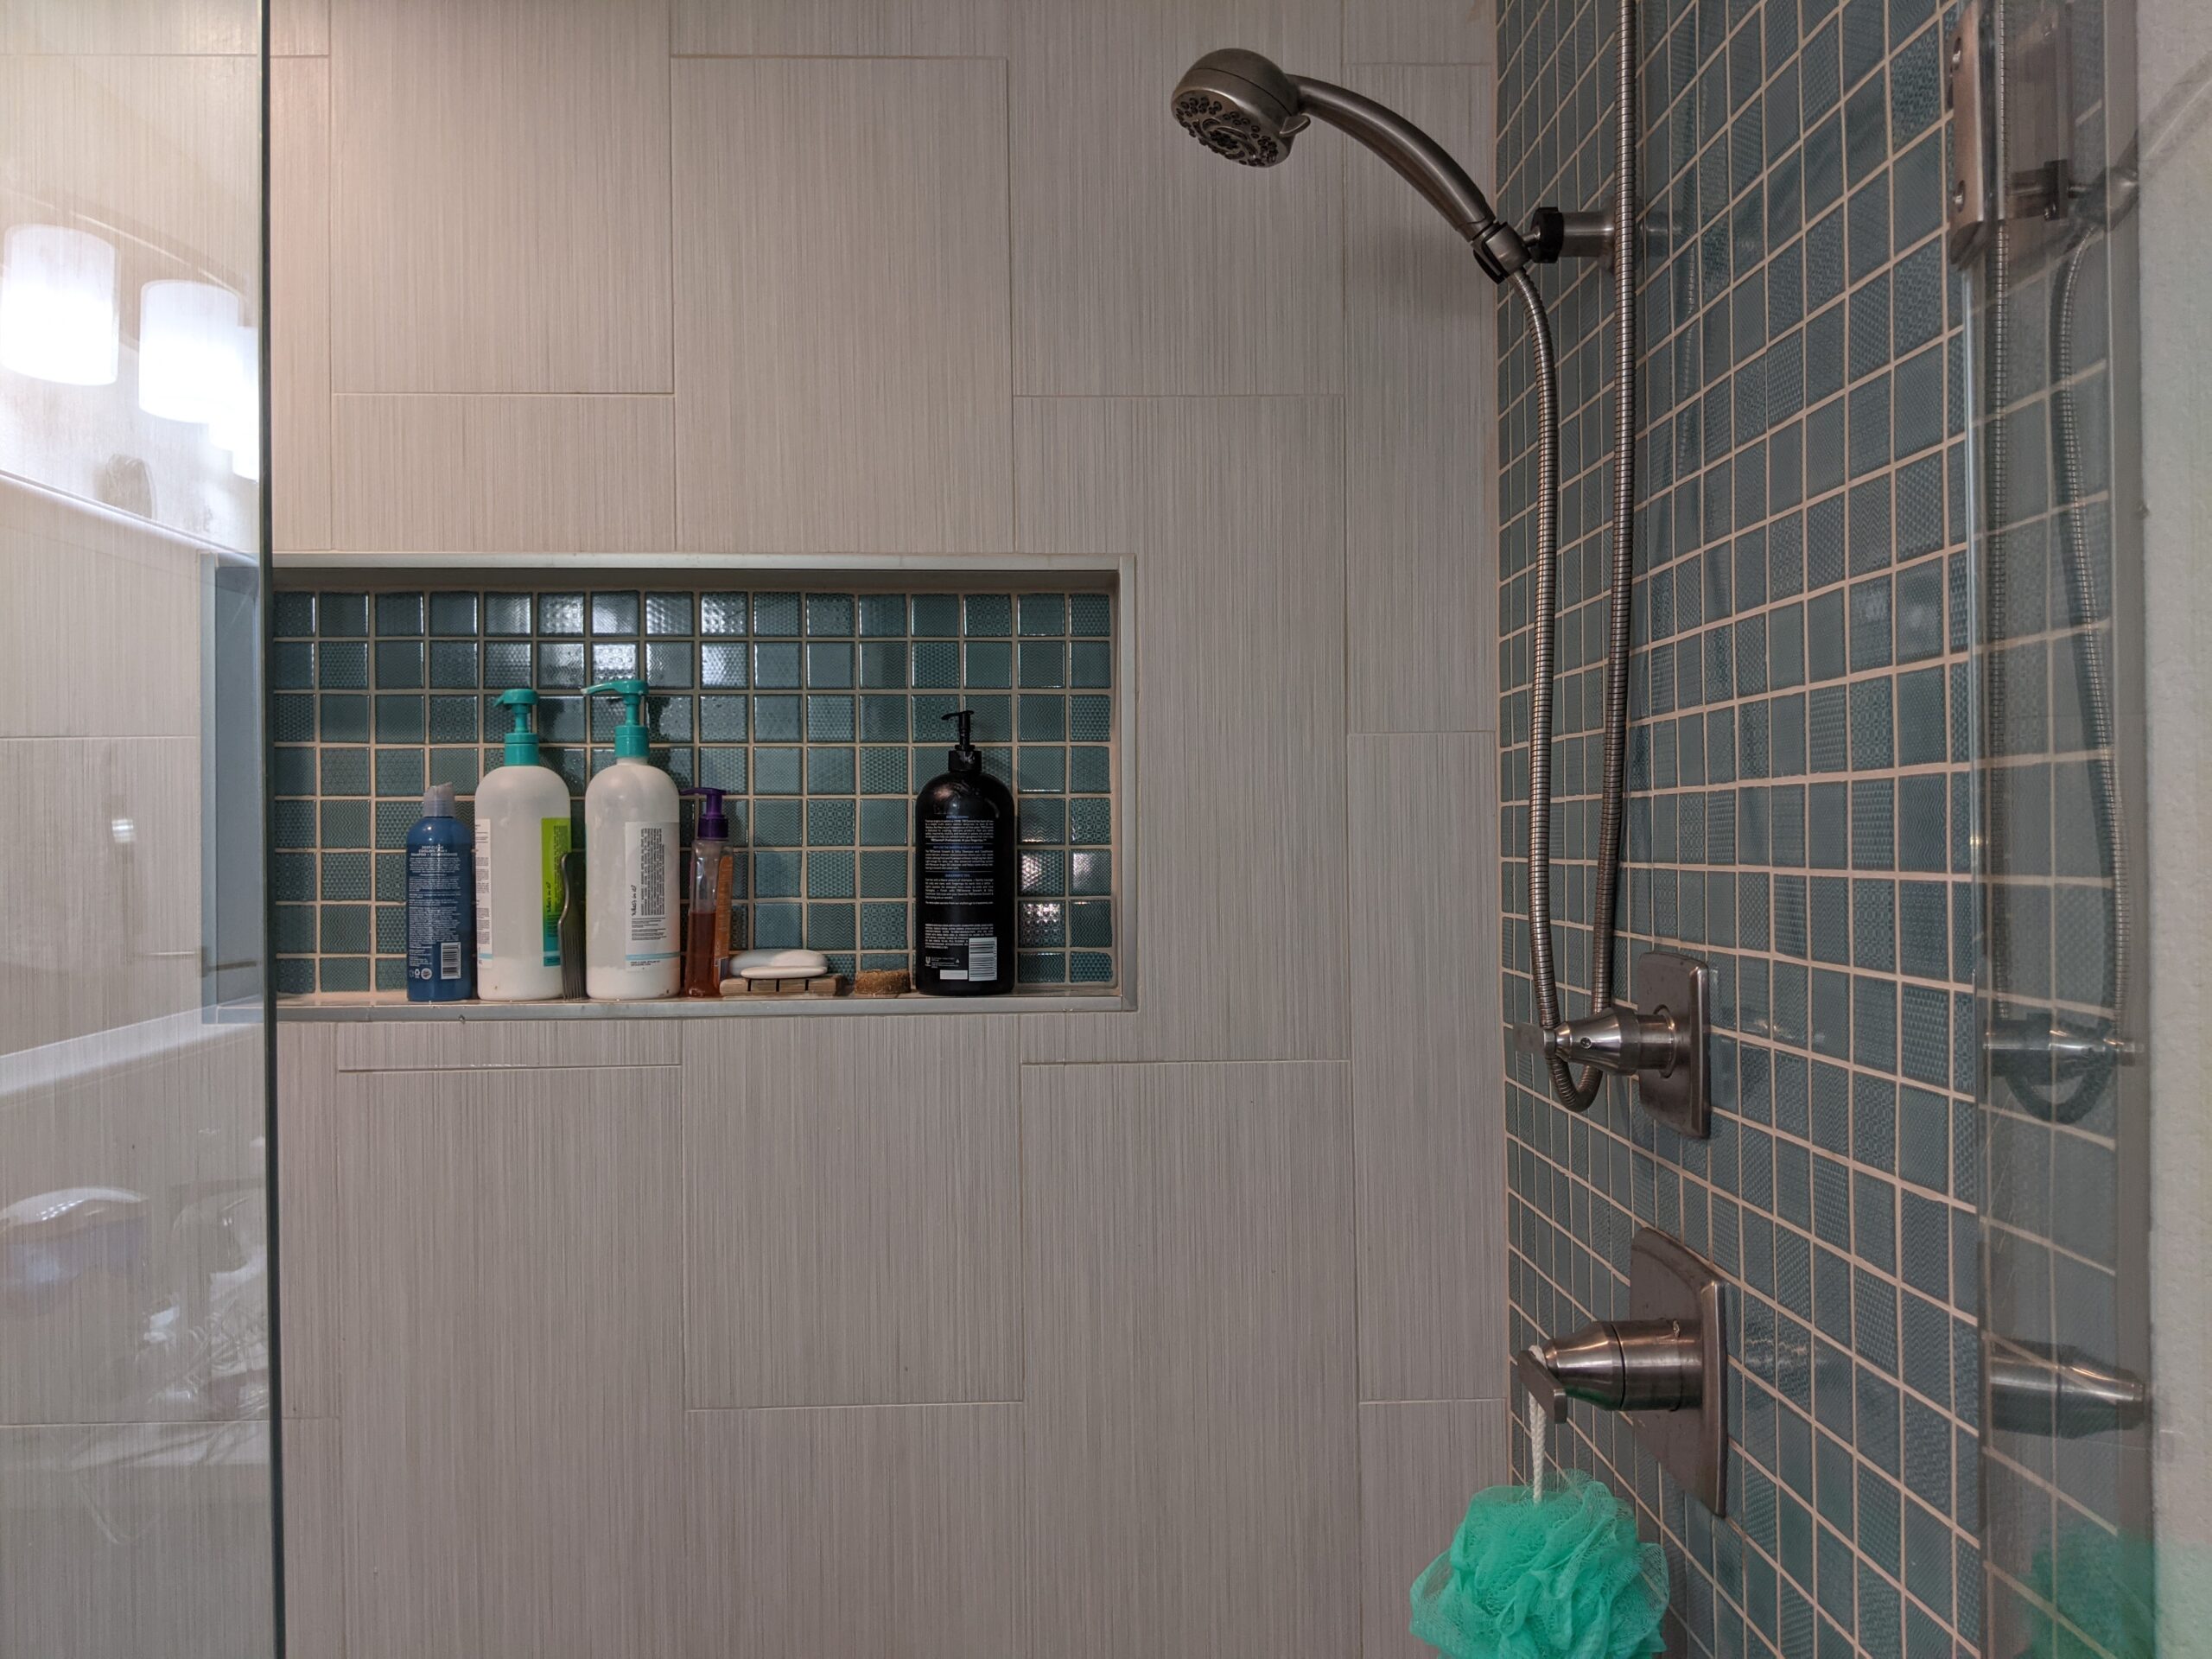 In our simplified design plan, this is the only wall with both tiles, light tiles cover the wall and the contrasting green ones are inside the nook.